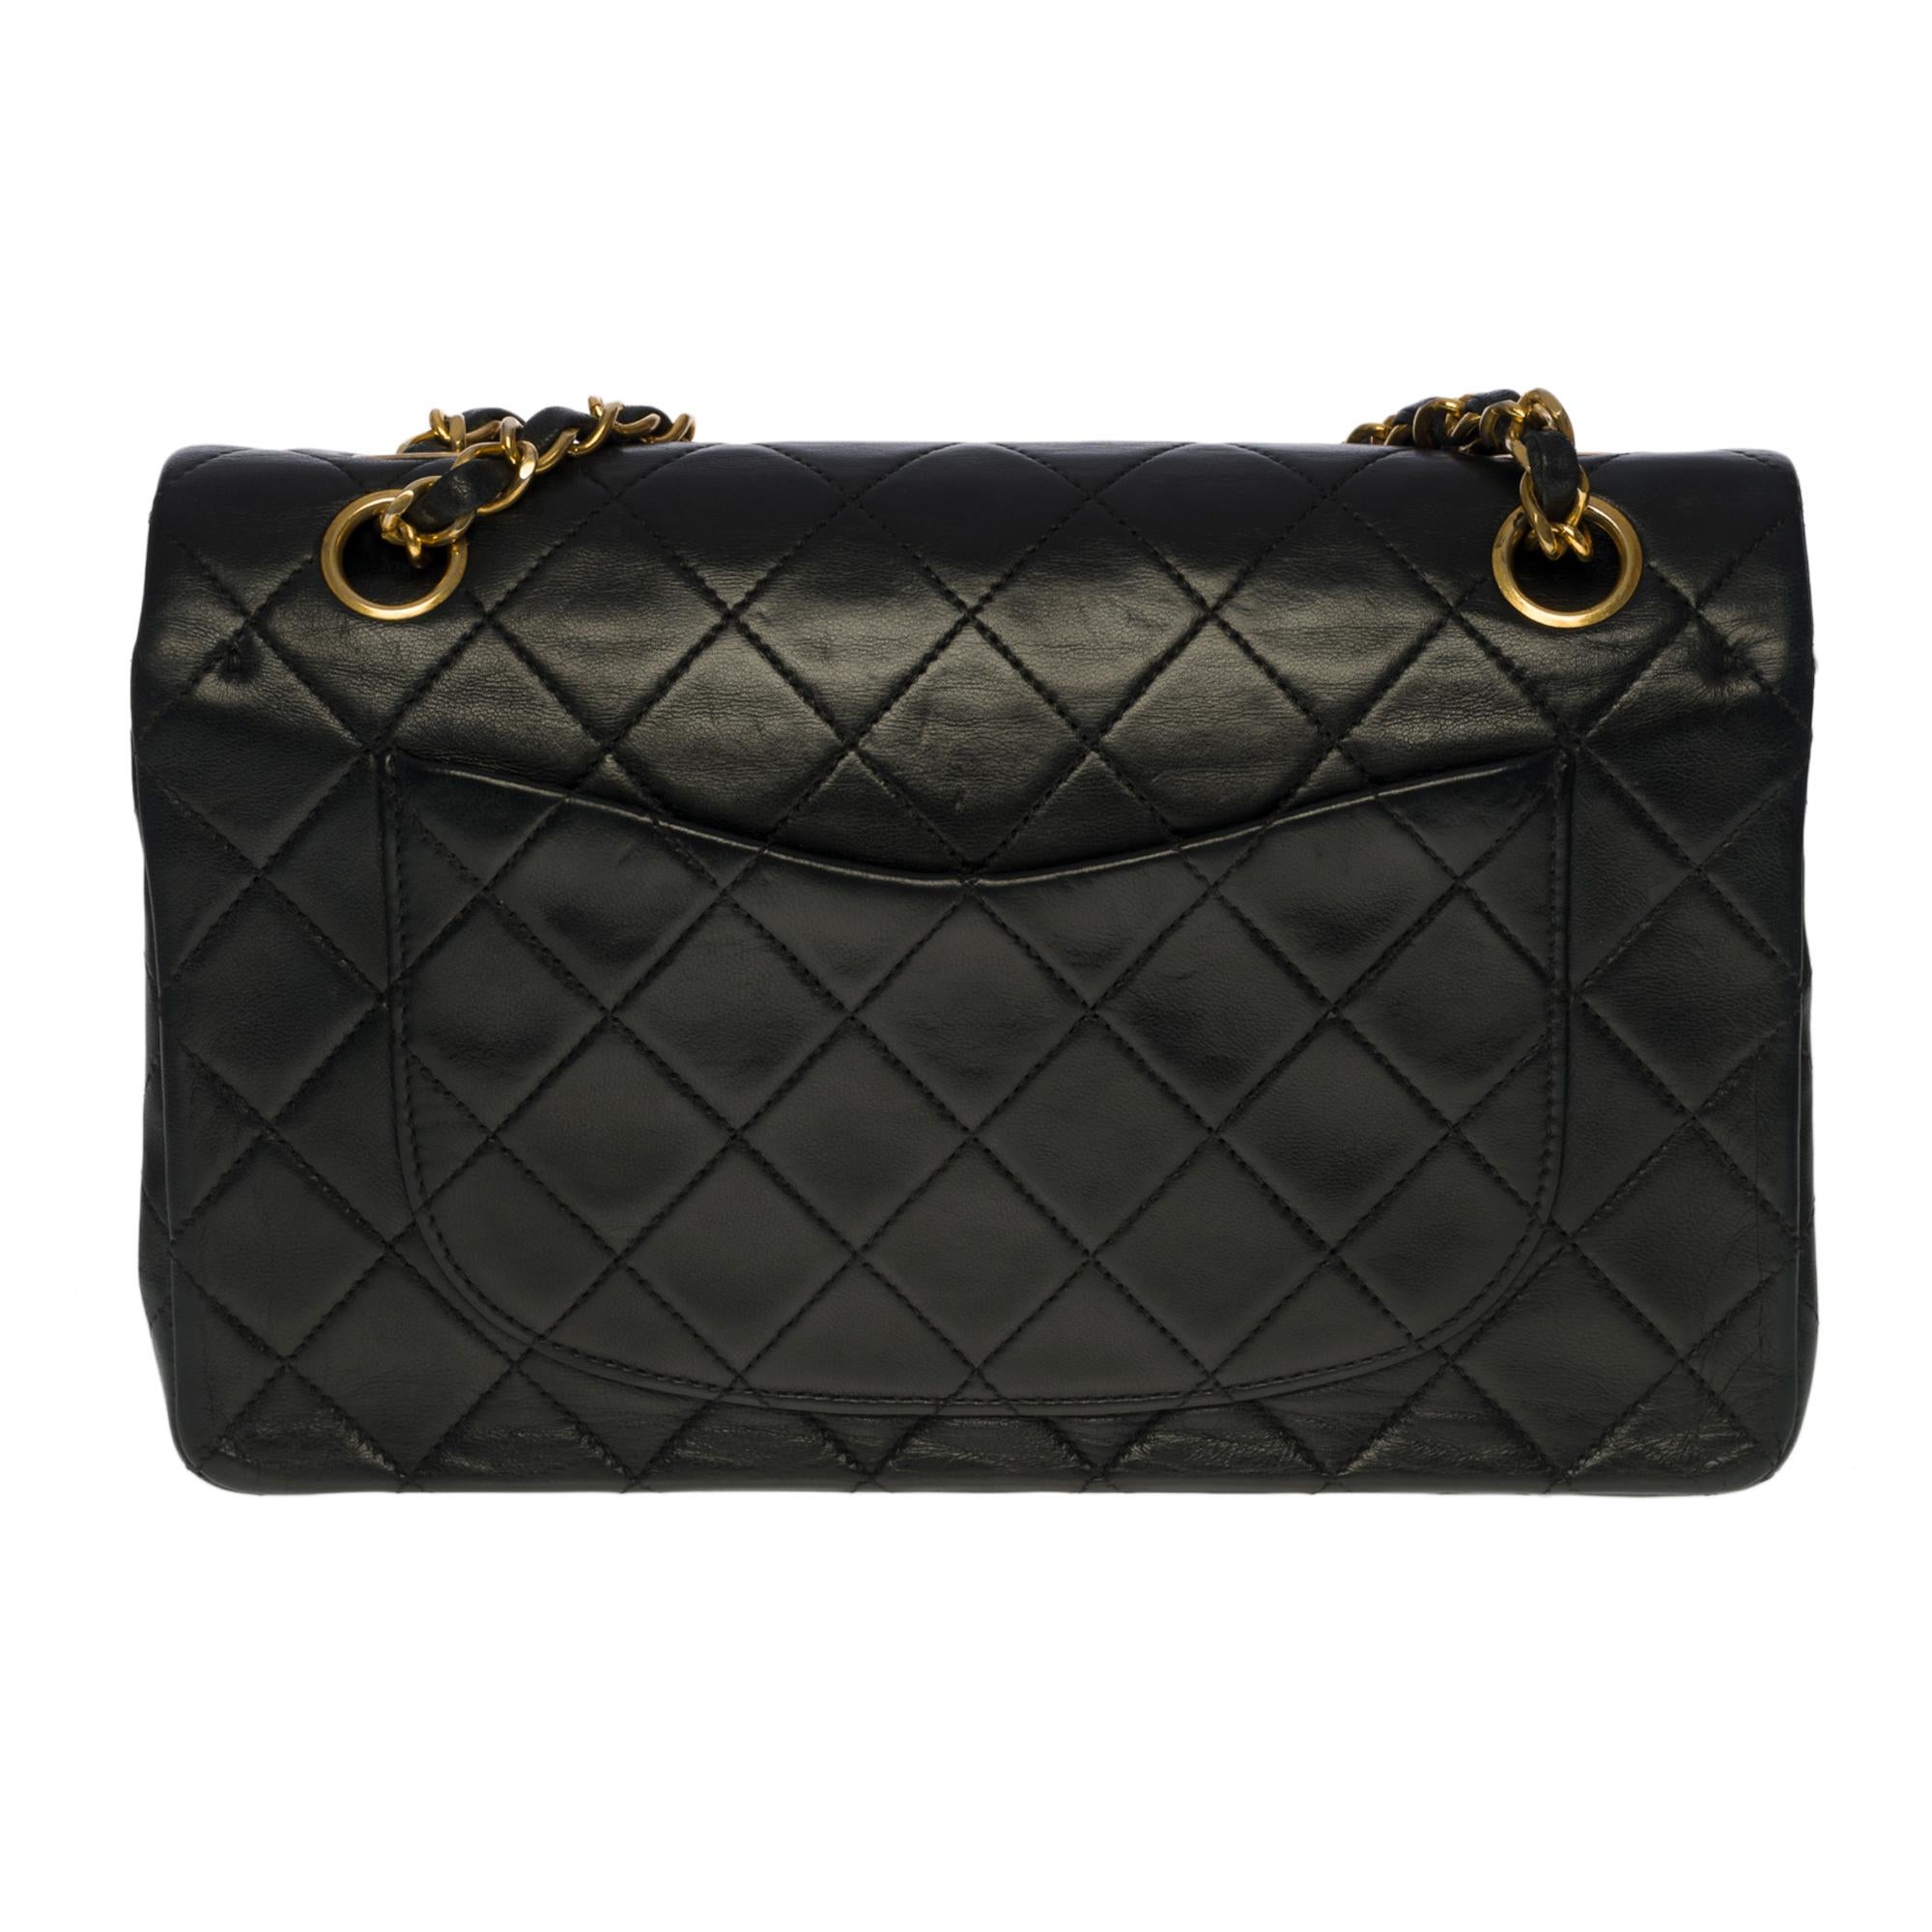 The coveted Chanel Timeless 23cm double flap bag in black quilted leather, gold-tone metal hardware, gold-tone metal chain interlaced with black leather for a shoulder and shoulder strap

Backpack pocket
Flap closure, gold-tone CC clasp
Double